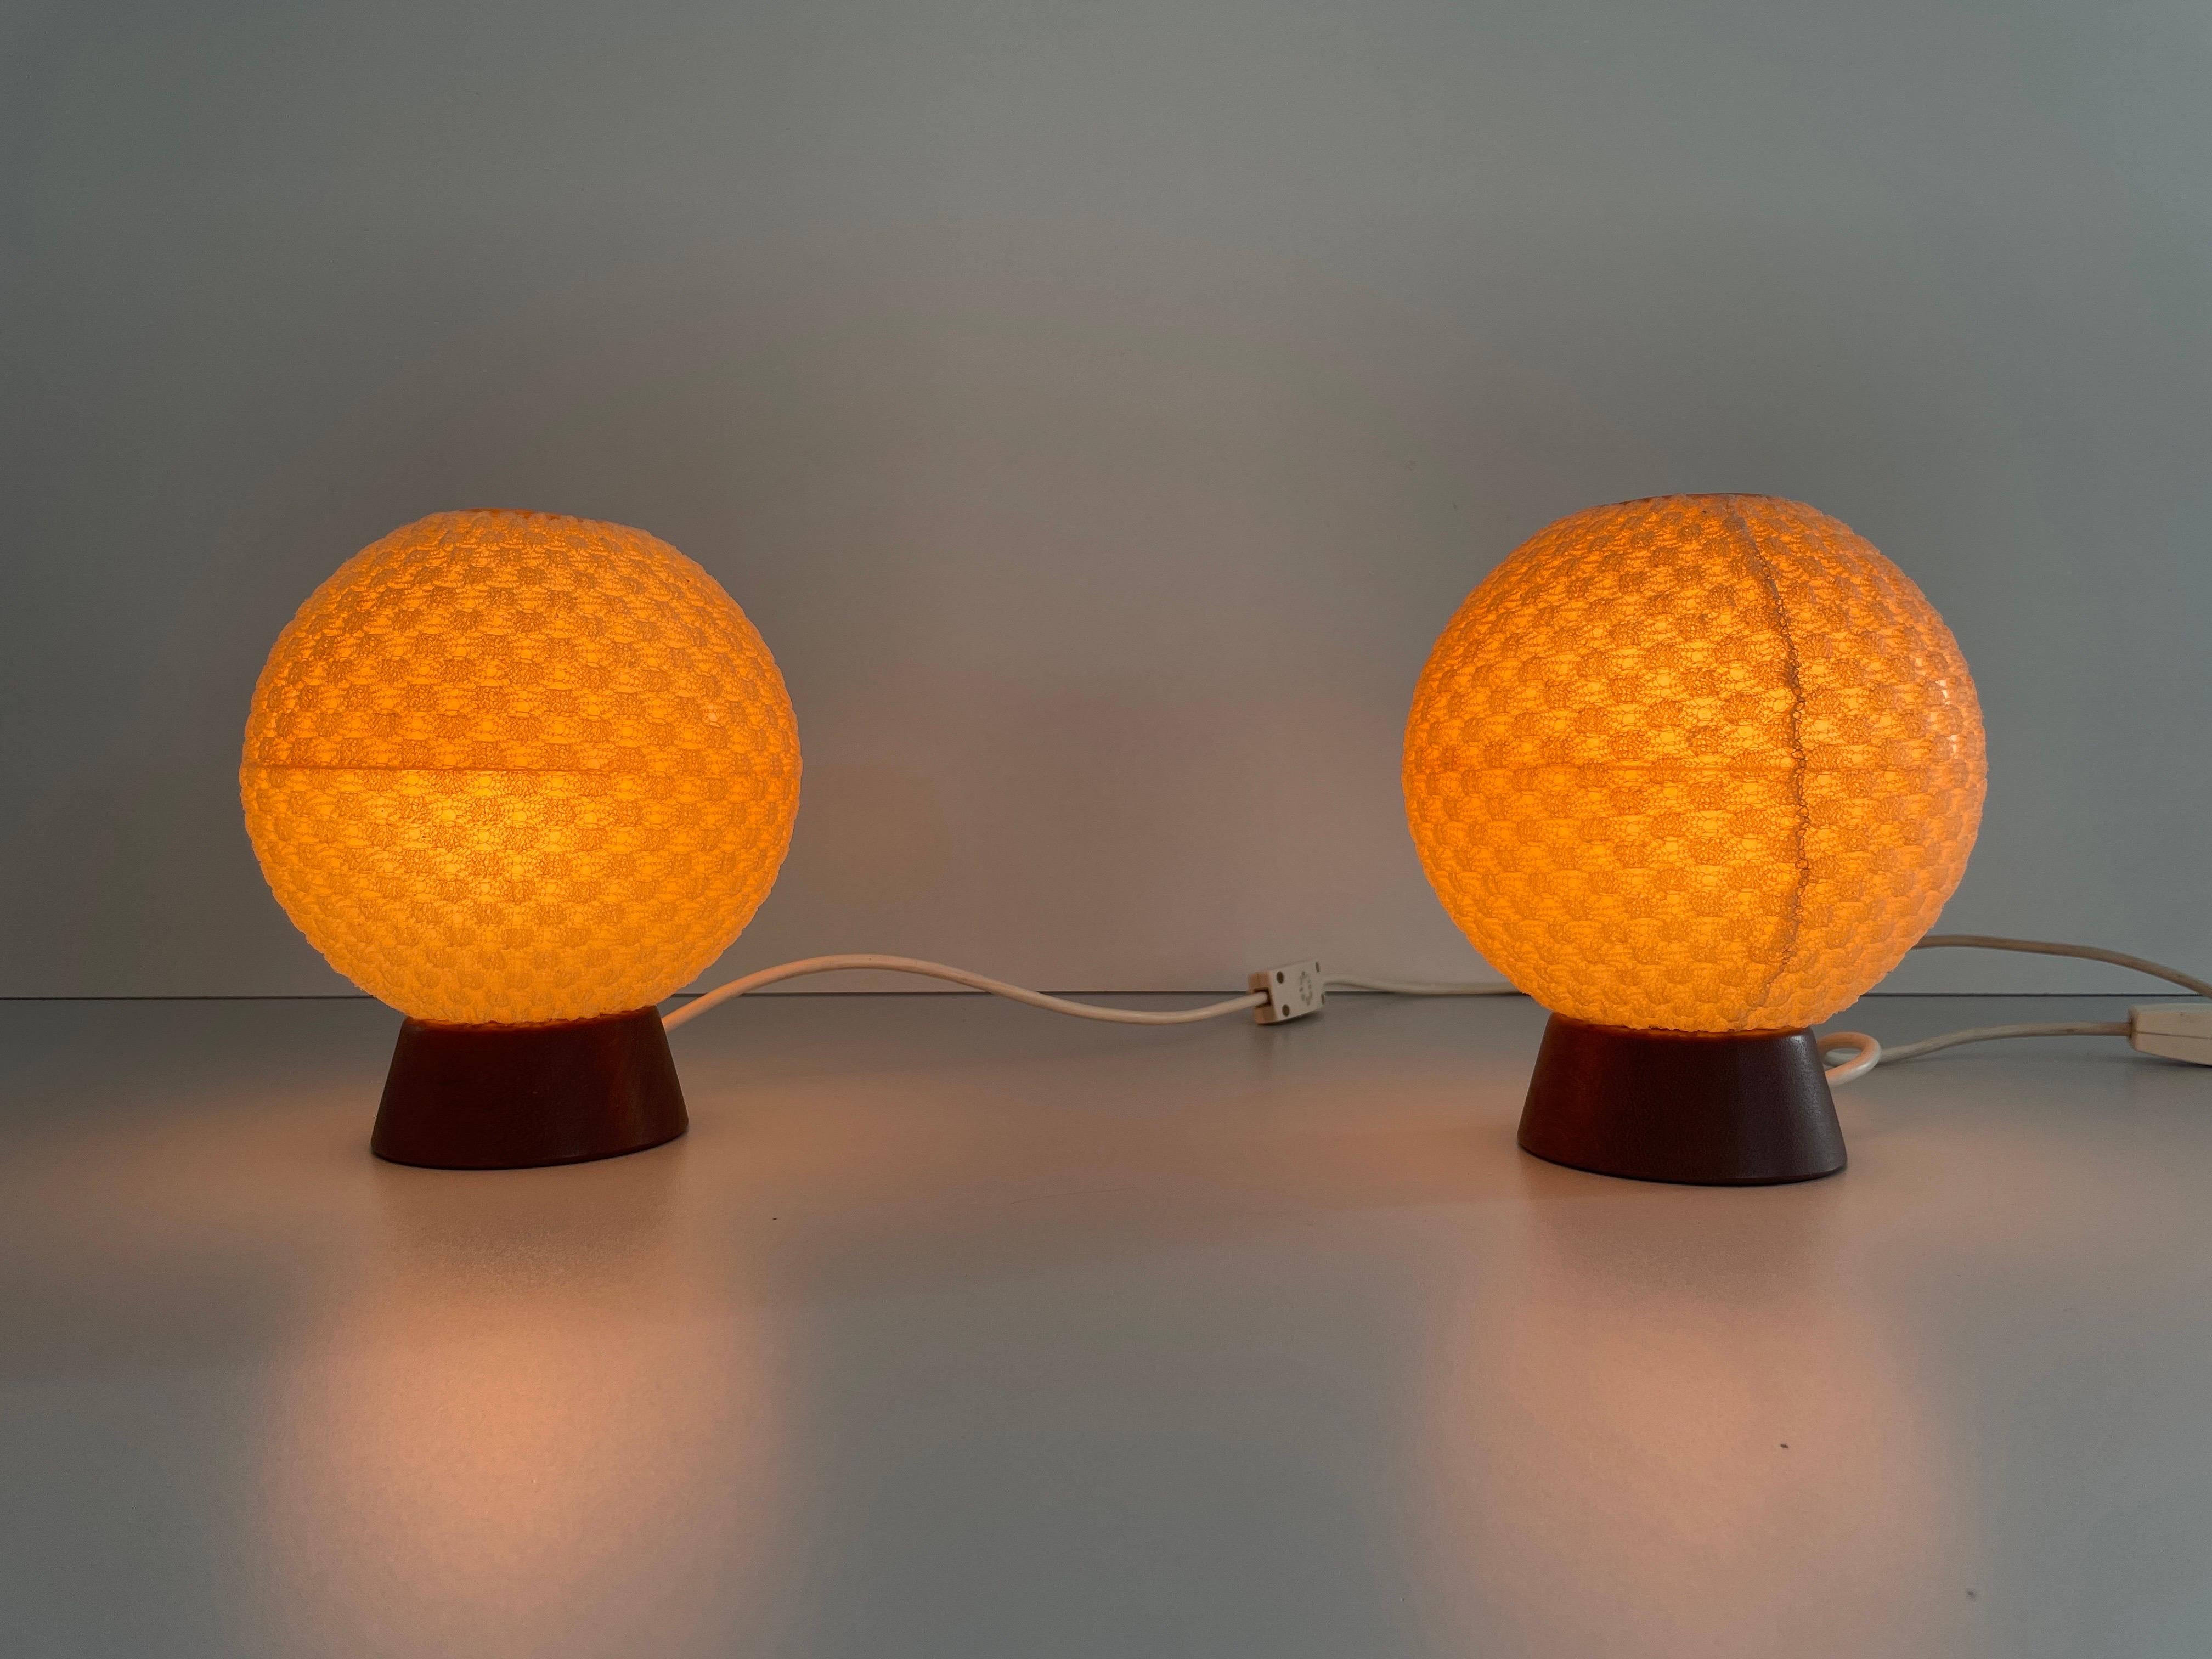 Teak & Ball Fabric Shade Pair of Bedside Lamps by Temde, 1960s Germany For Sale 3